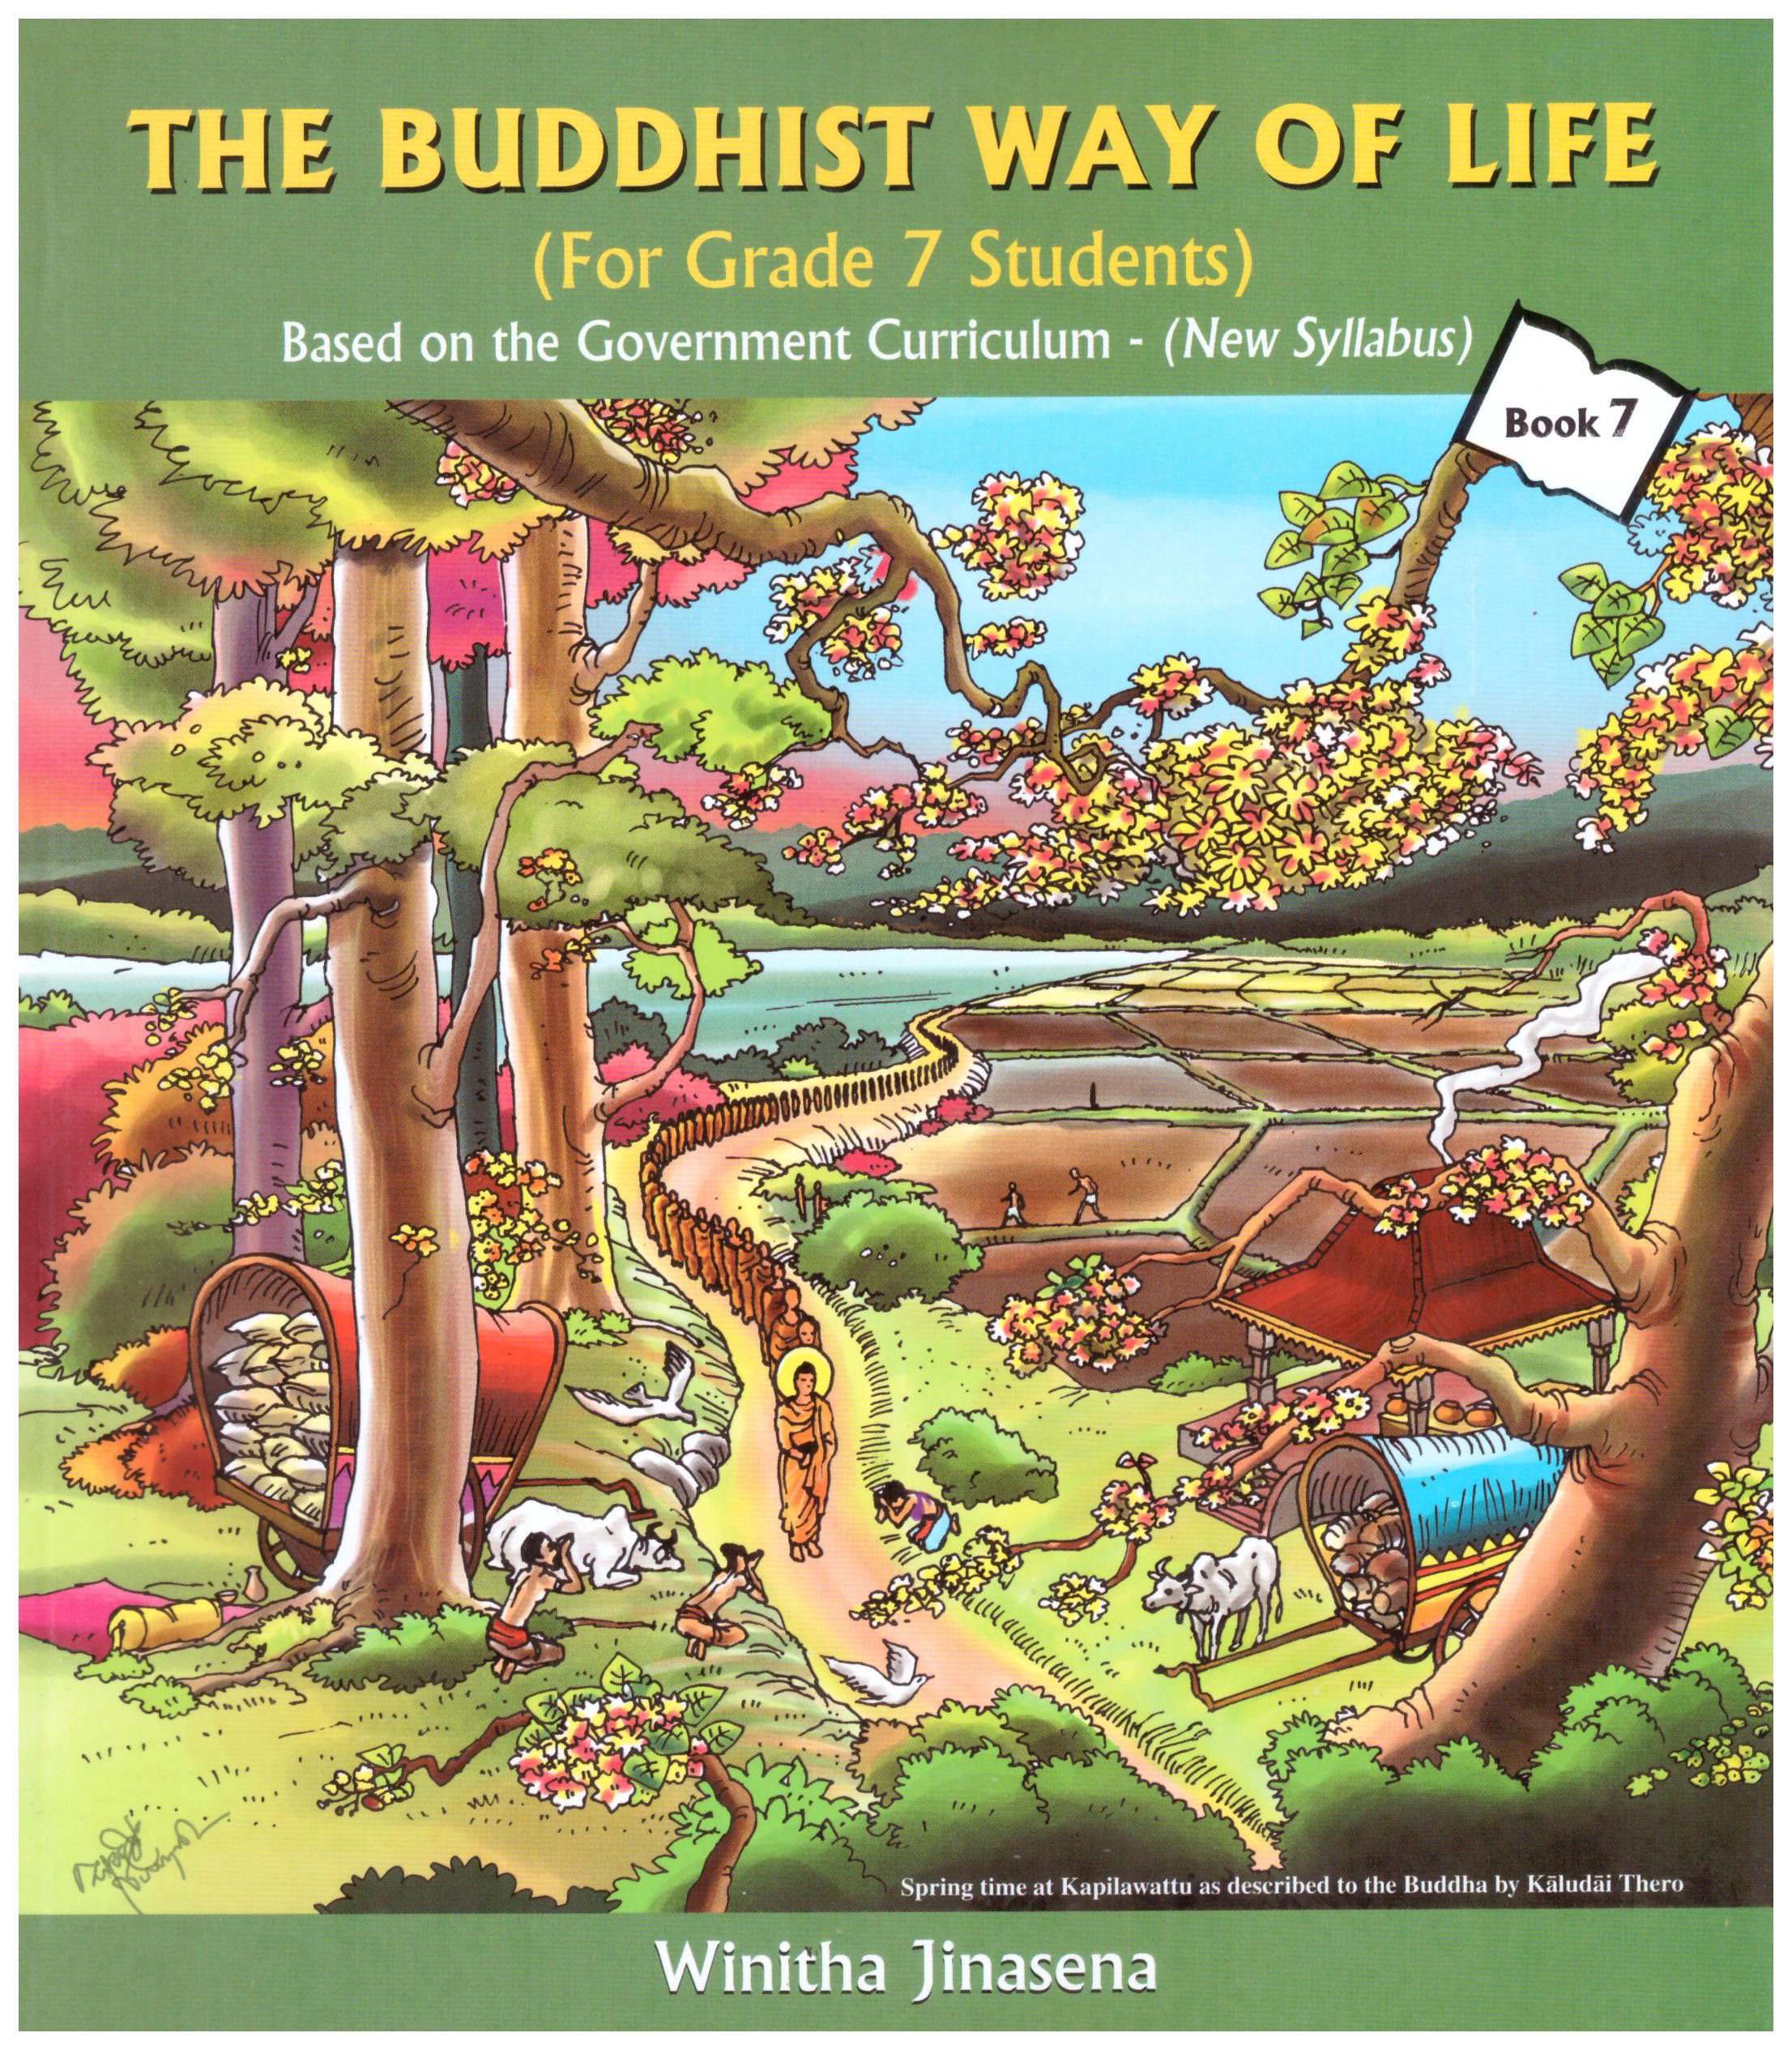 The Buddhist Way of Life Book 7